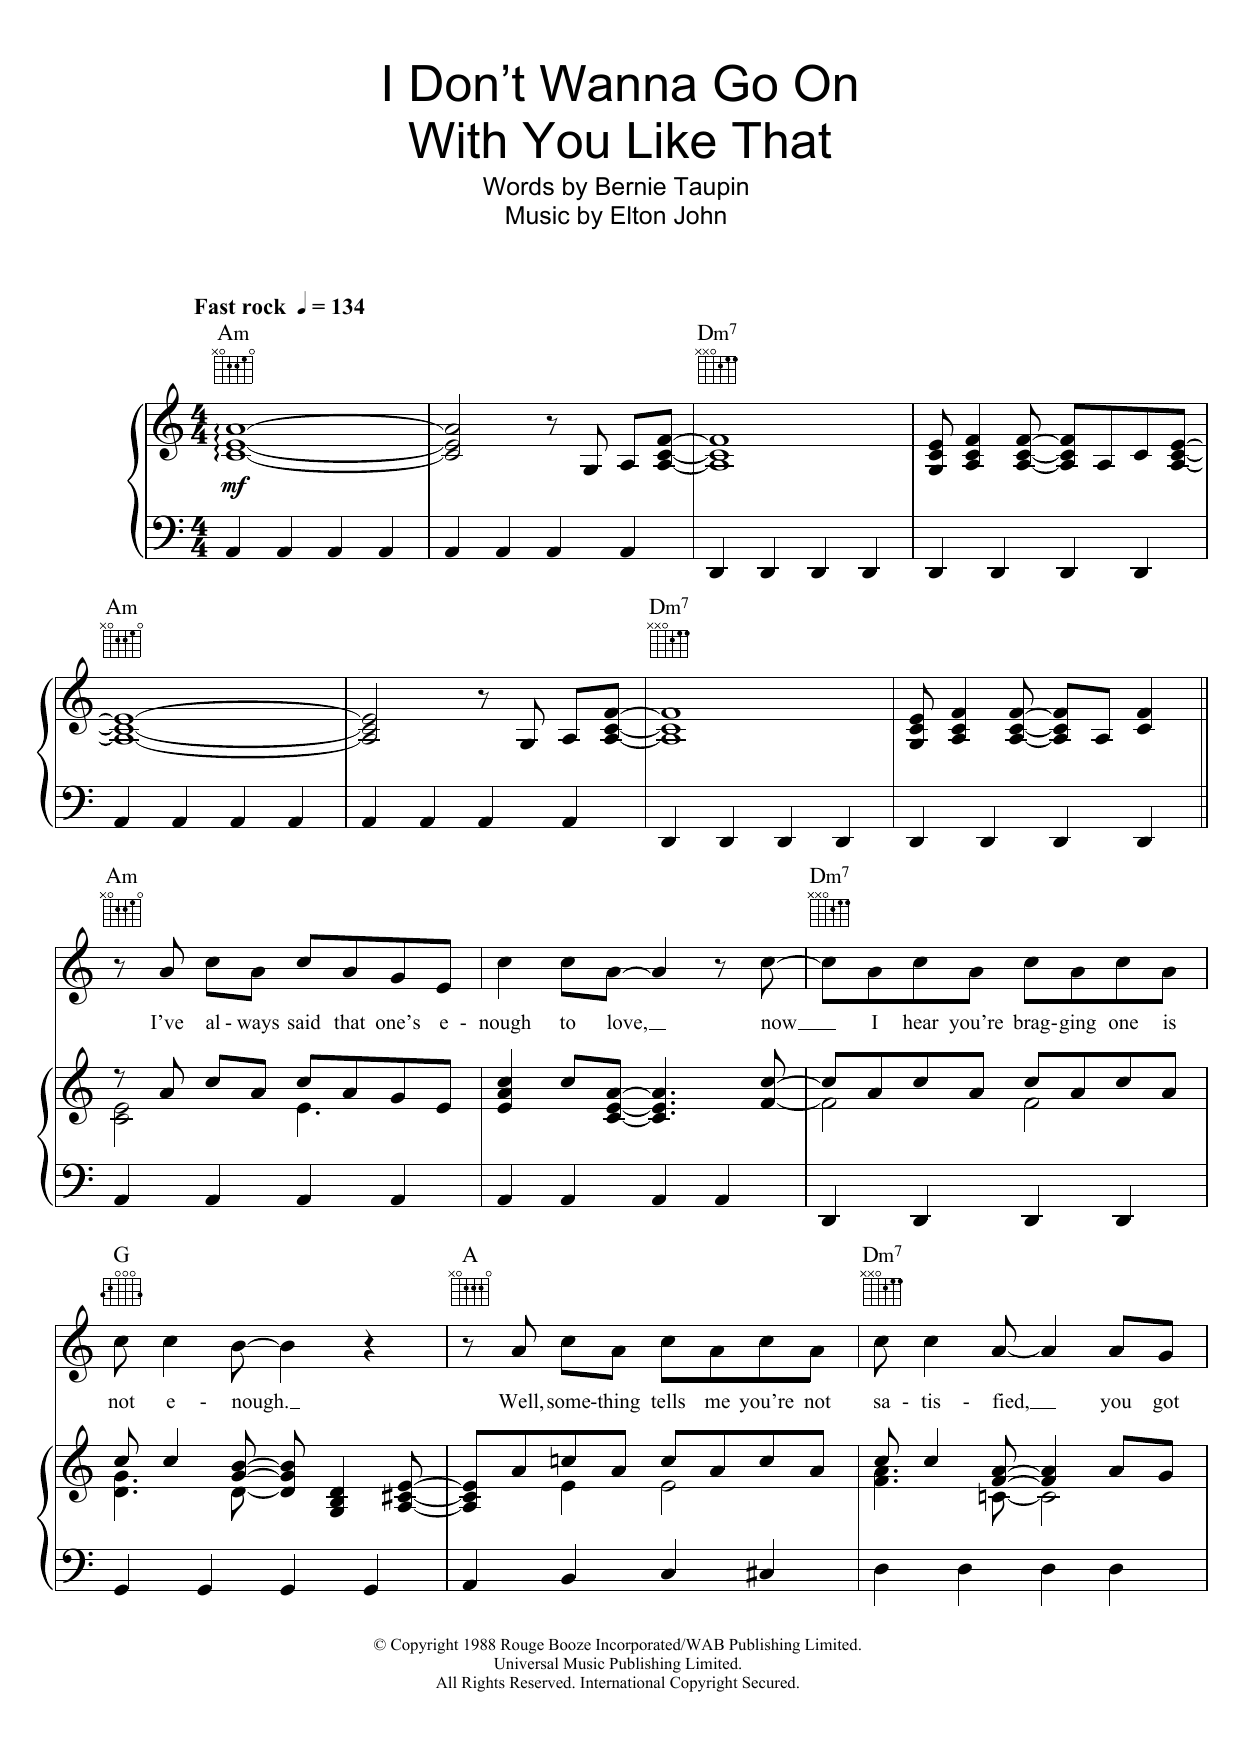 Download Elton John I Don't Wanna Go On With You Like That Sheet Music